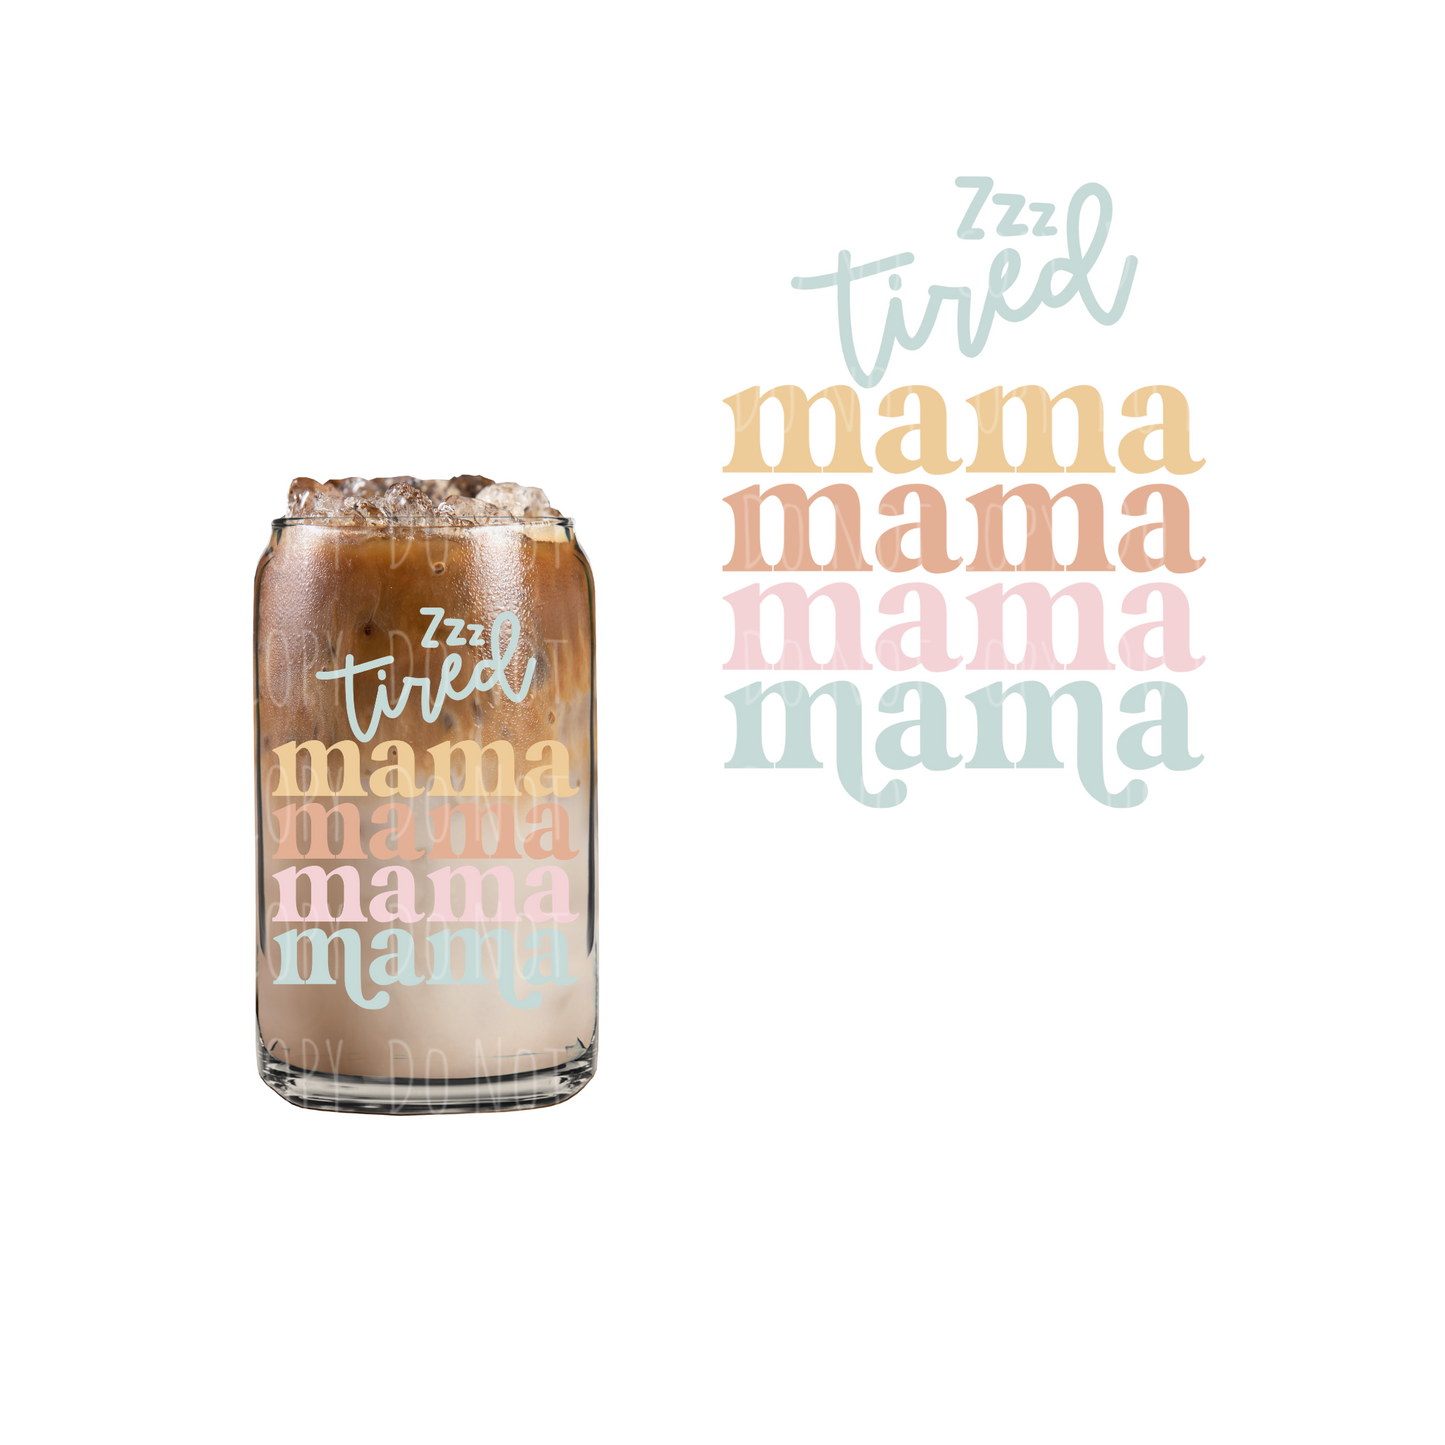 Tired Mama UVDTF decal